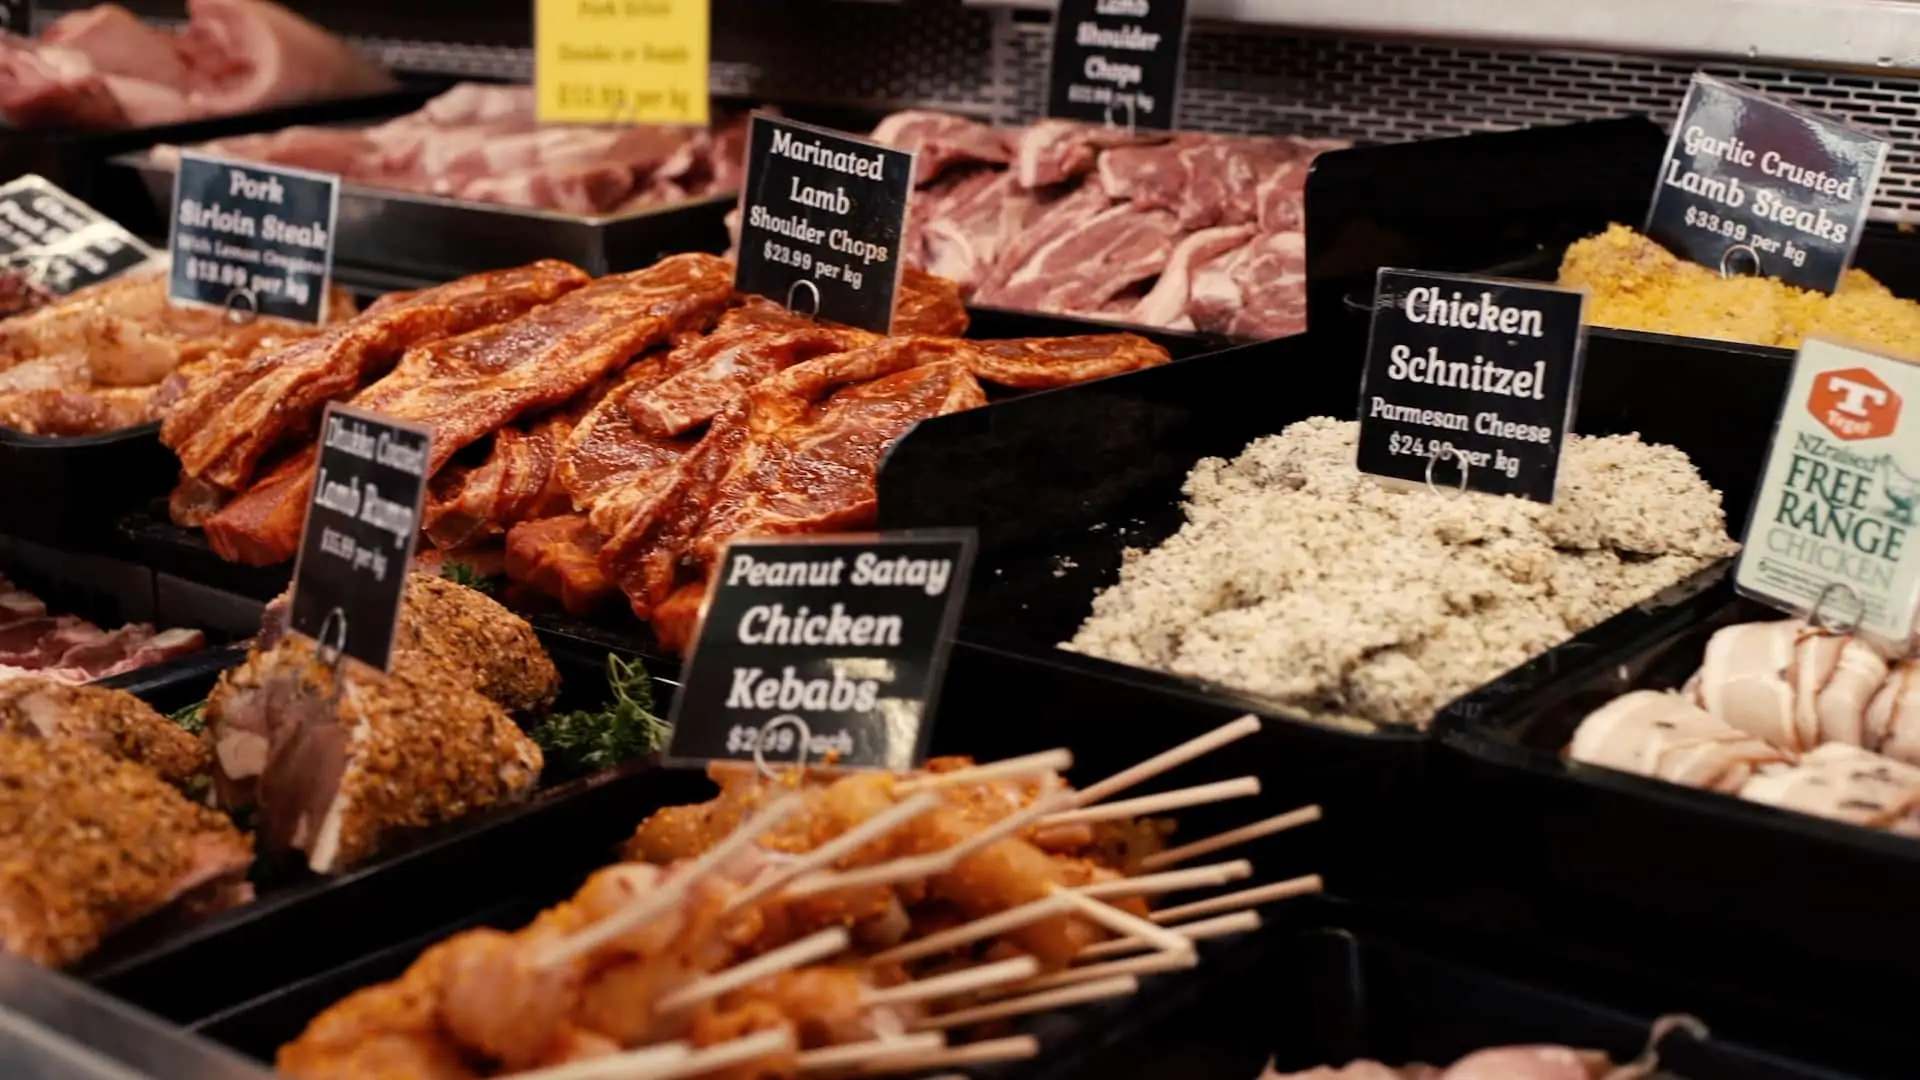 Selection of prepared meats